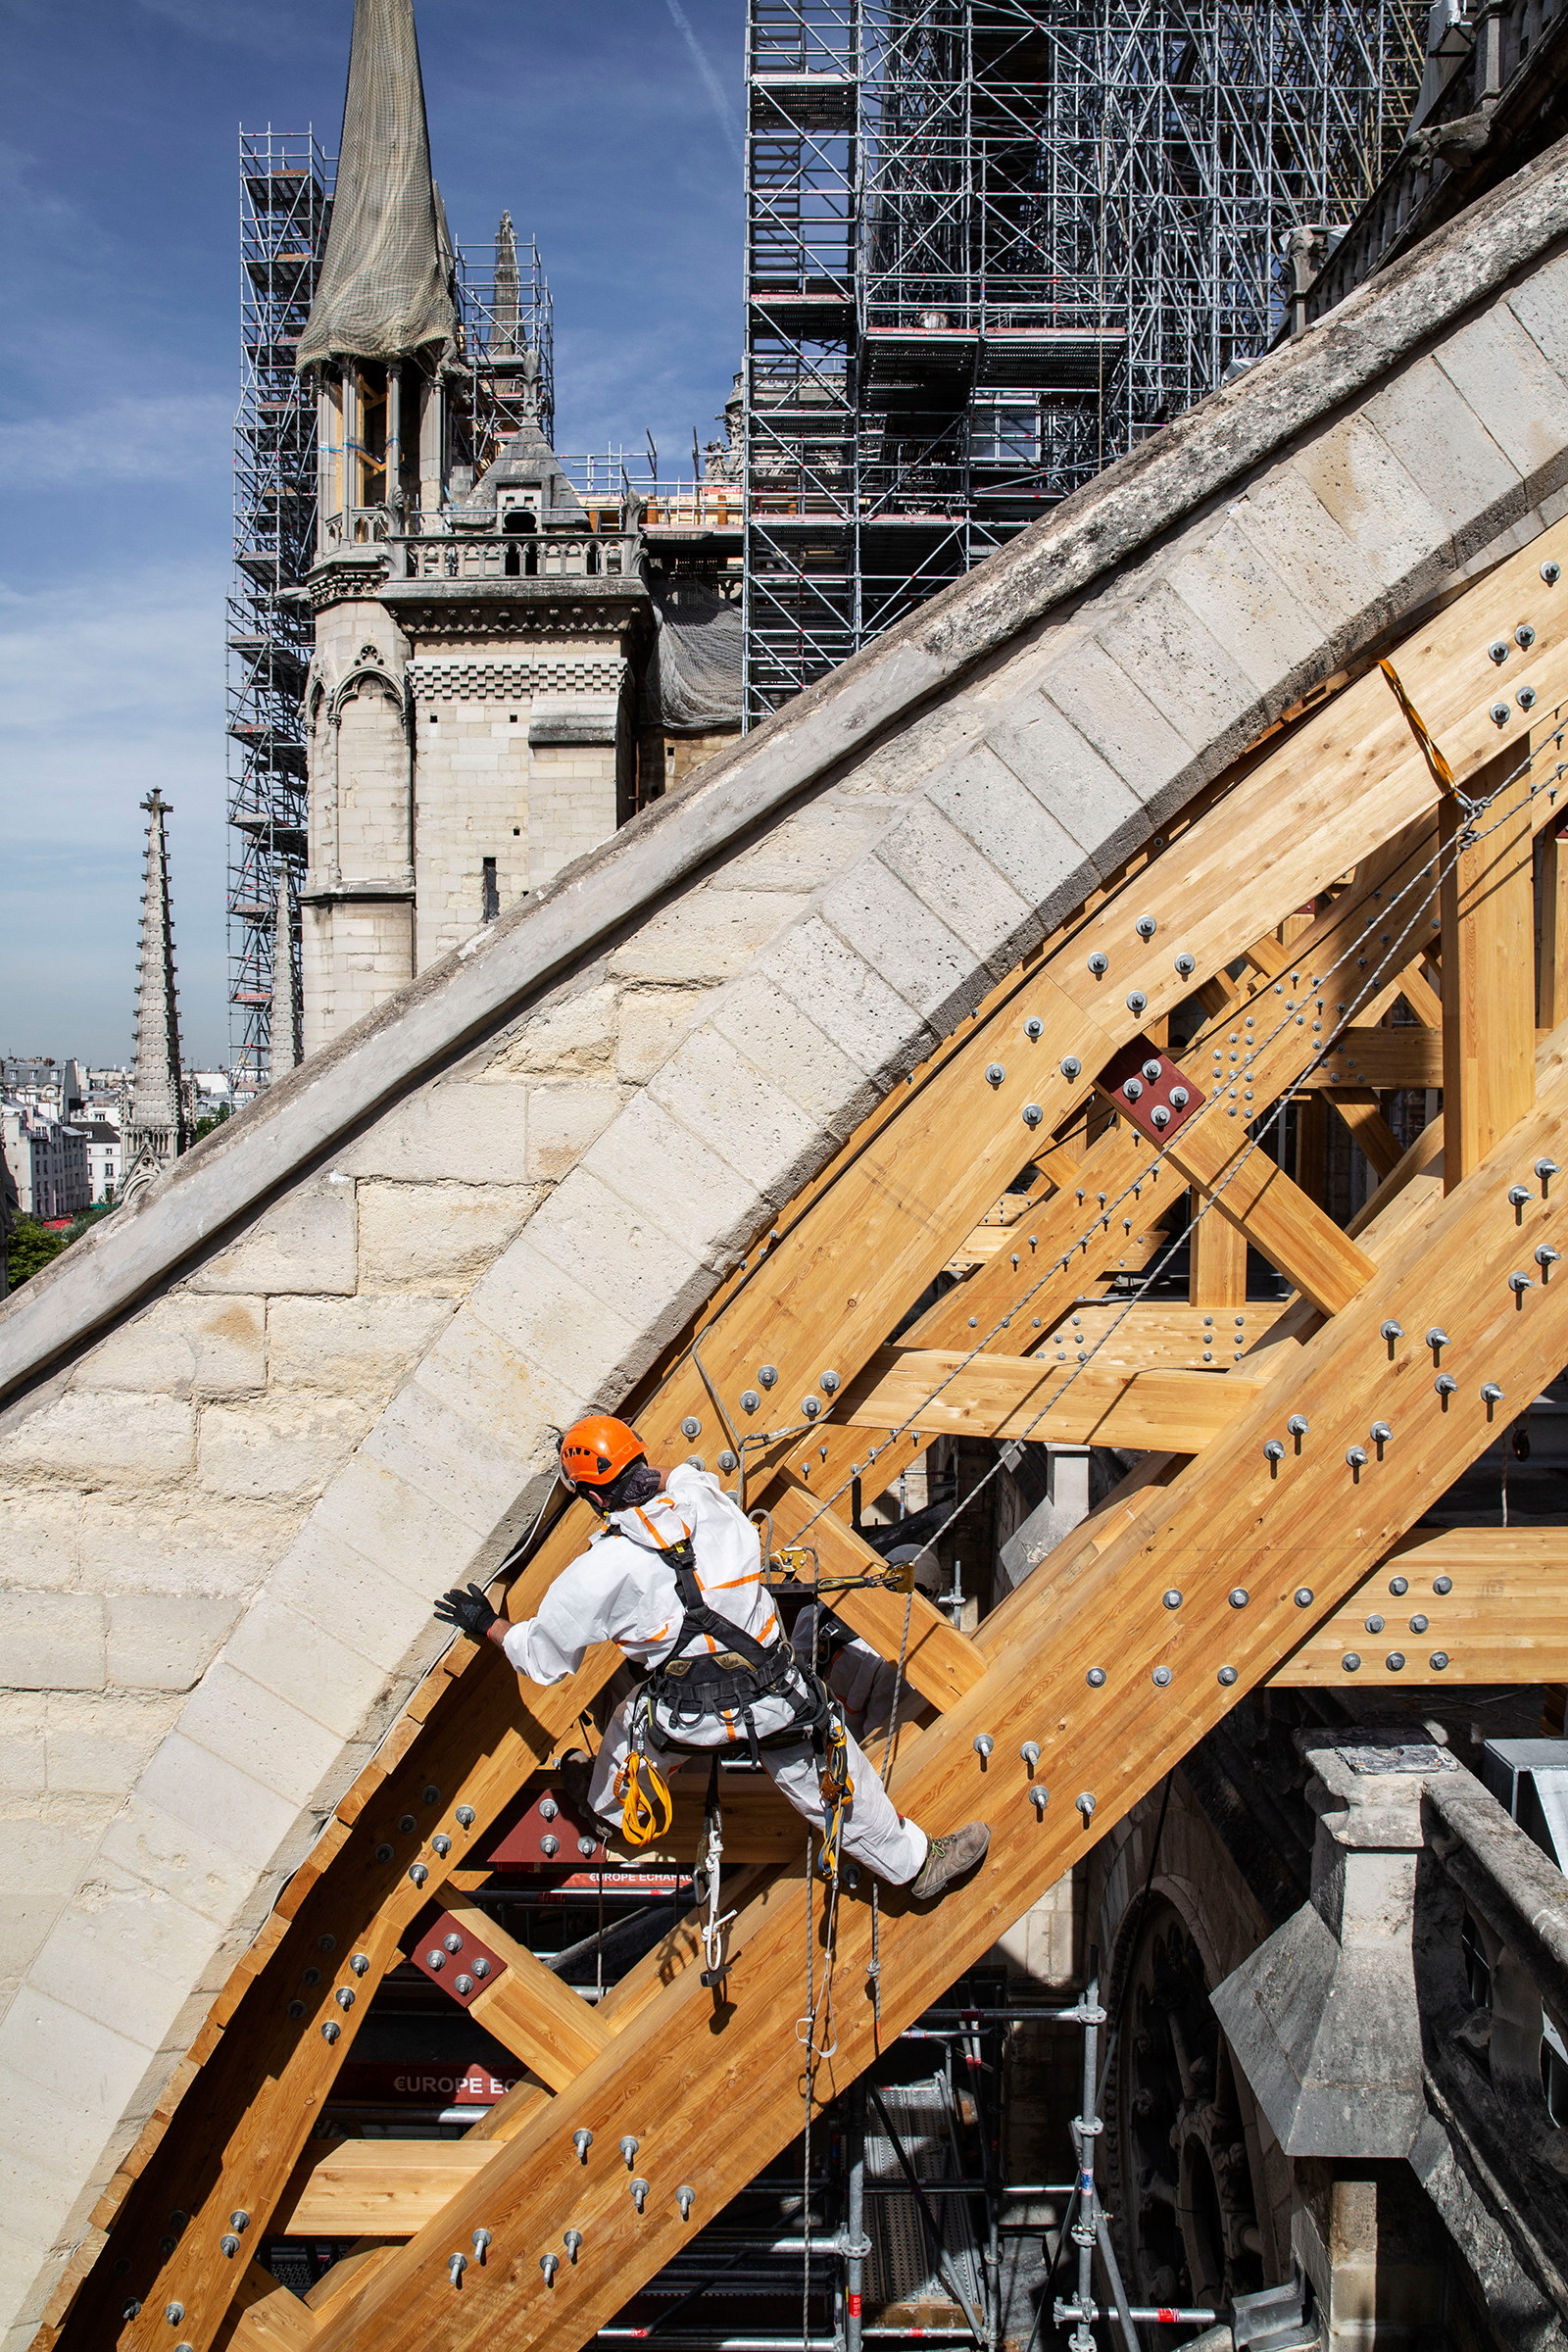 A rope-access technician installs a wooden arch to support a flying buttress on July 22. (Patrick Zachmann—Magnum Photos for TIME)